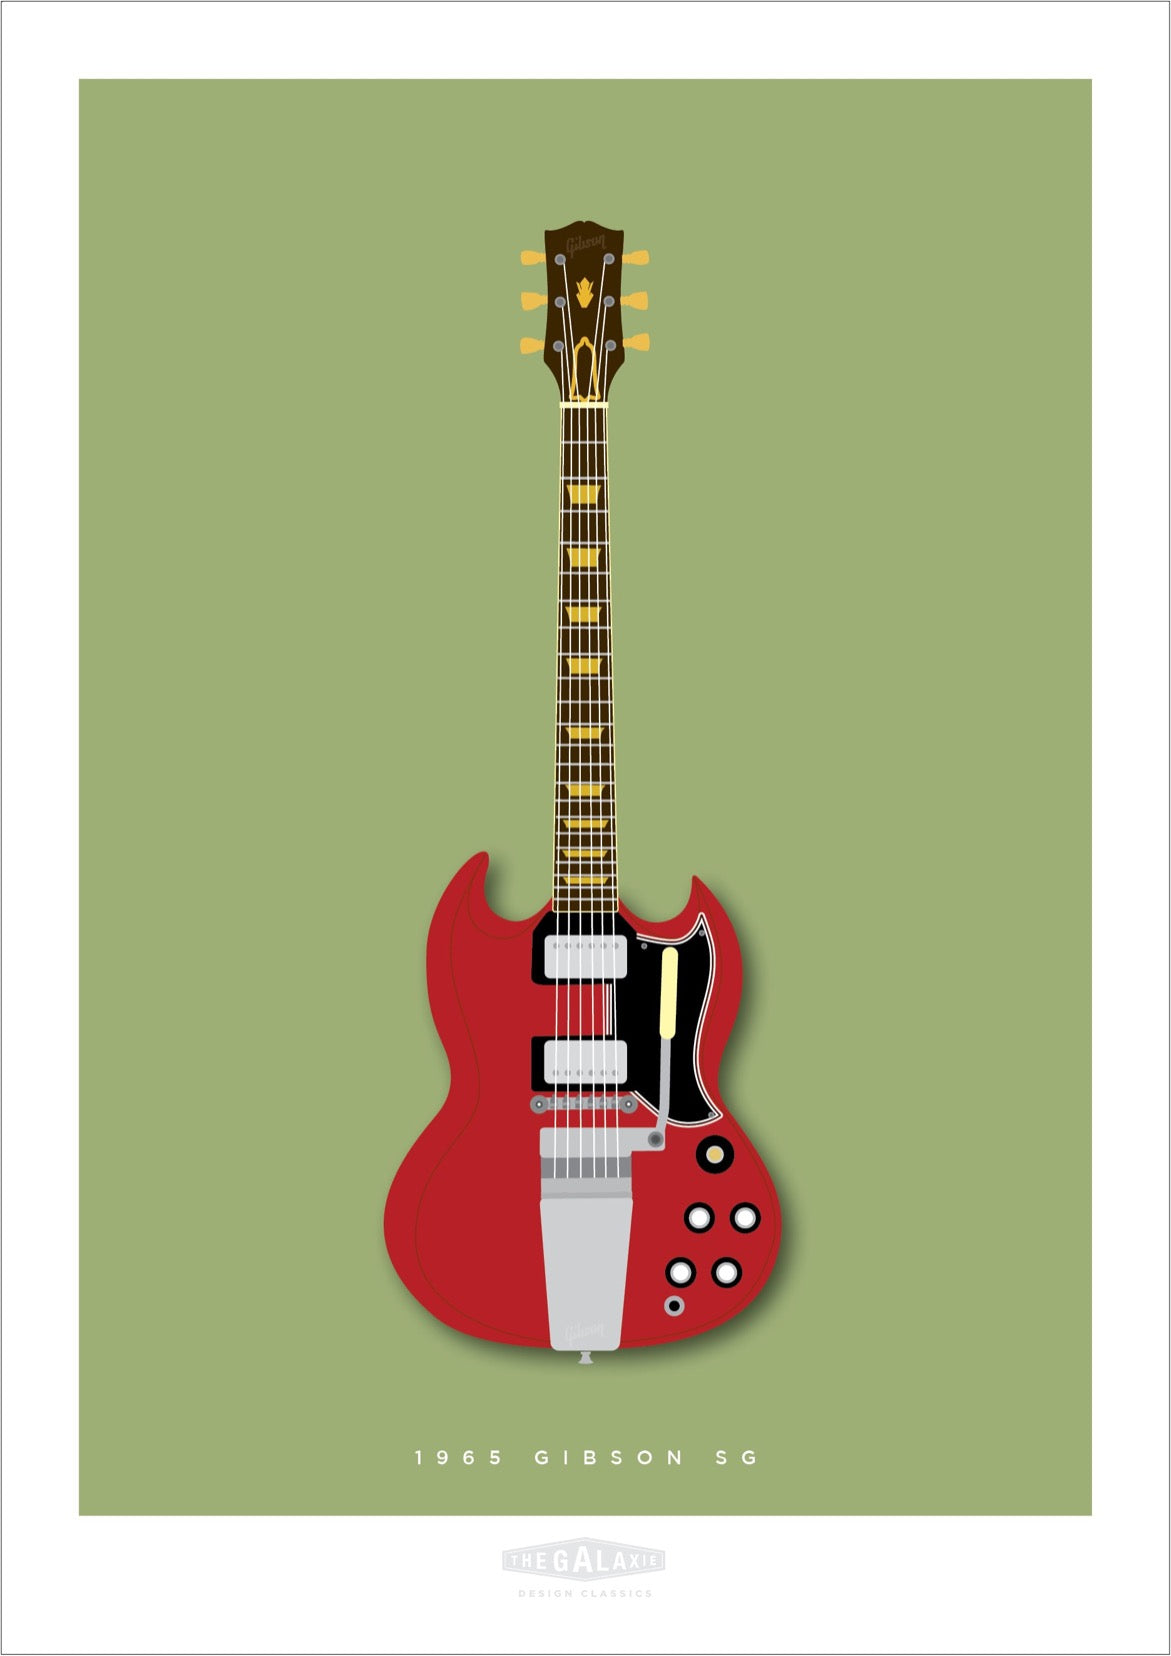 An original hand drawn poster of a red 1965 Gibson SG on a green background.